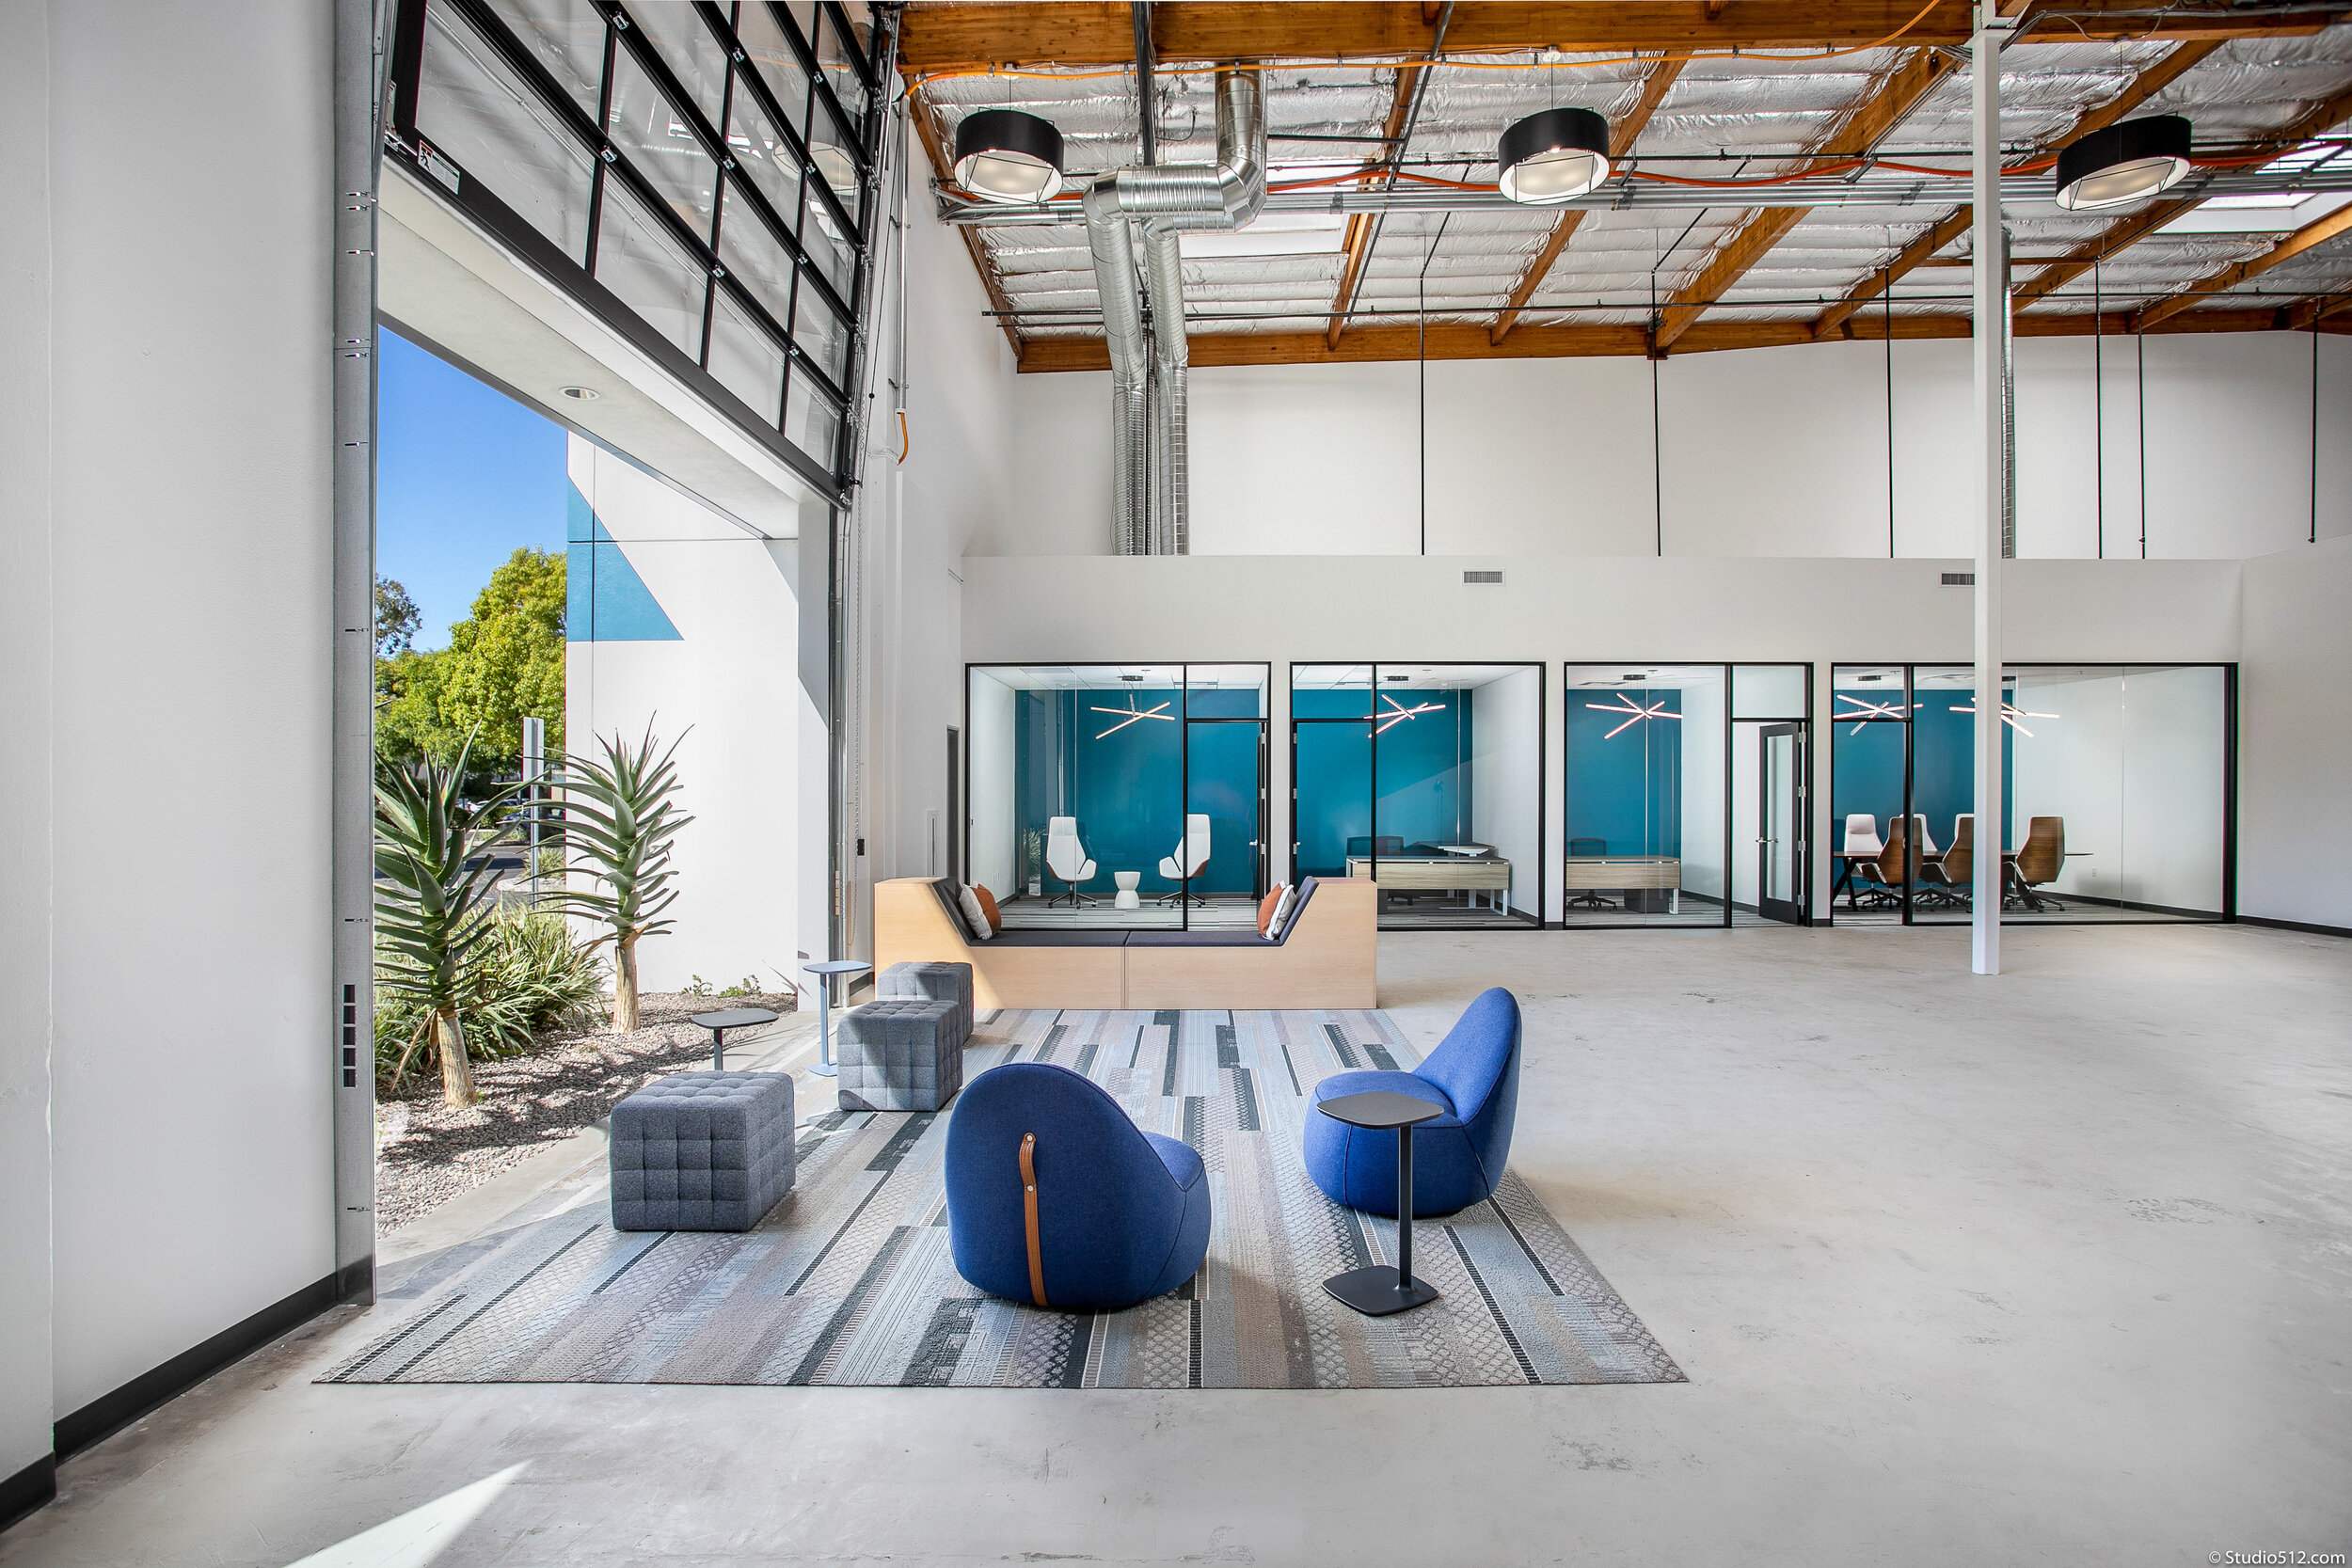 SENTRE Completes Renovation of Creative Office Building